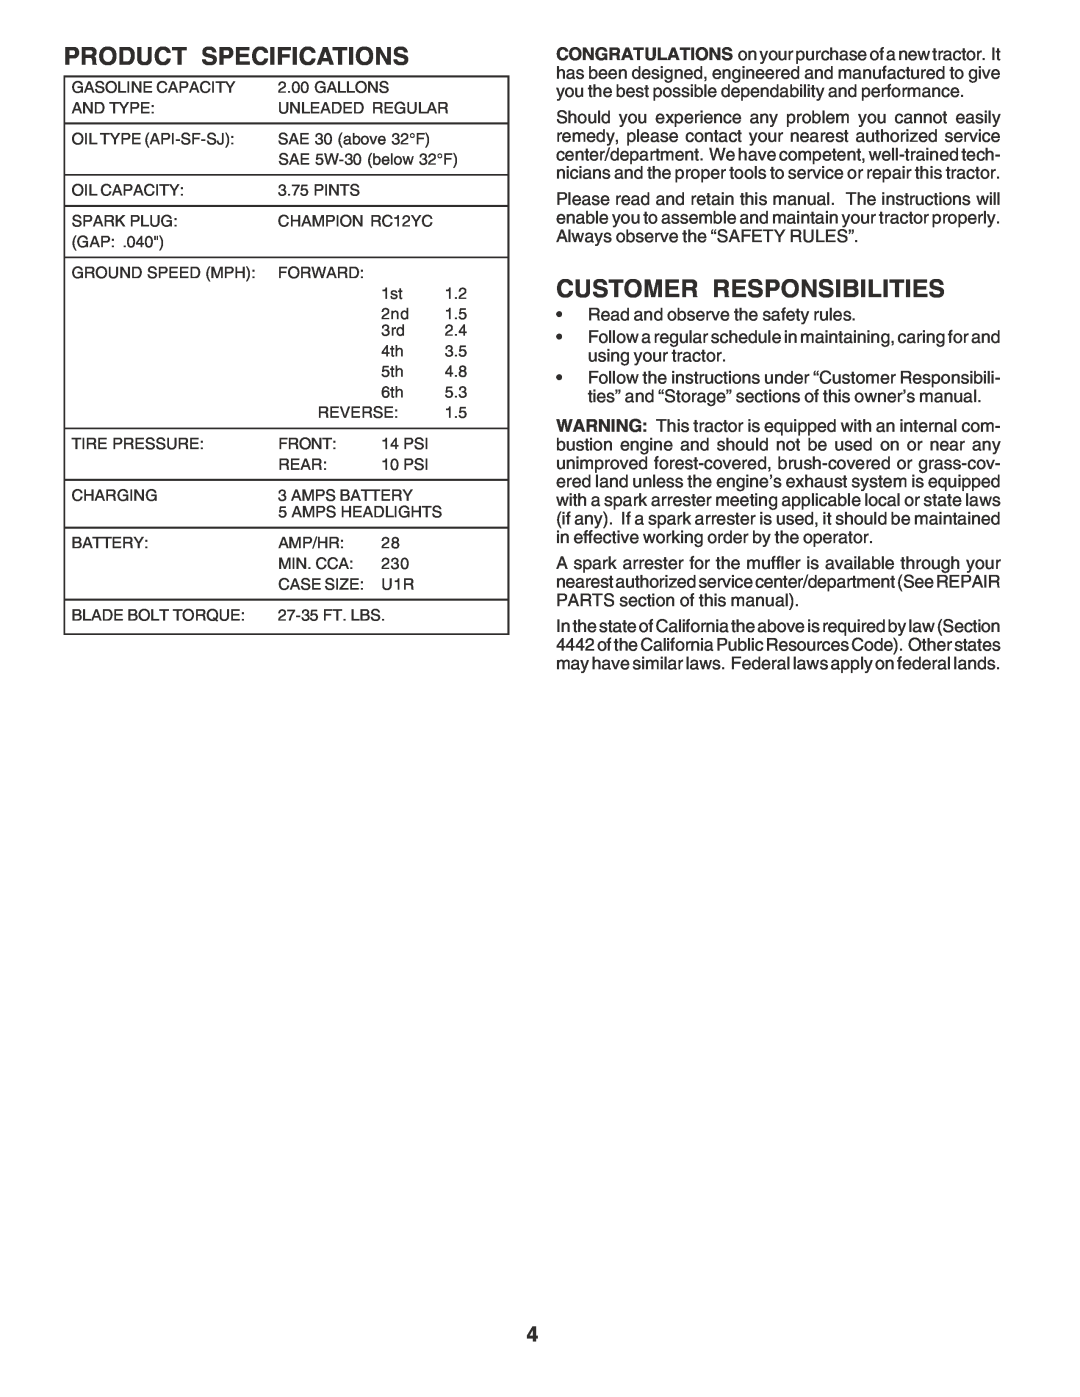 Poulan 181377 owner manual Product Specifications, Customer Responsibilities 